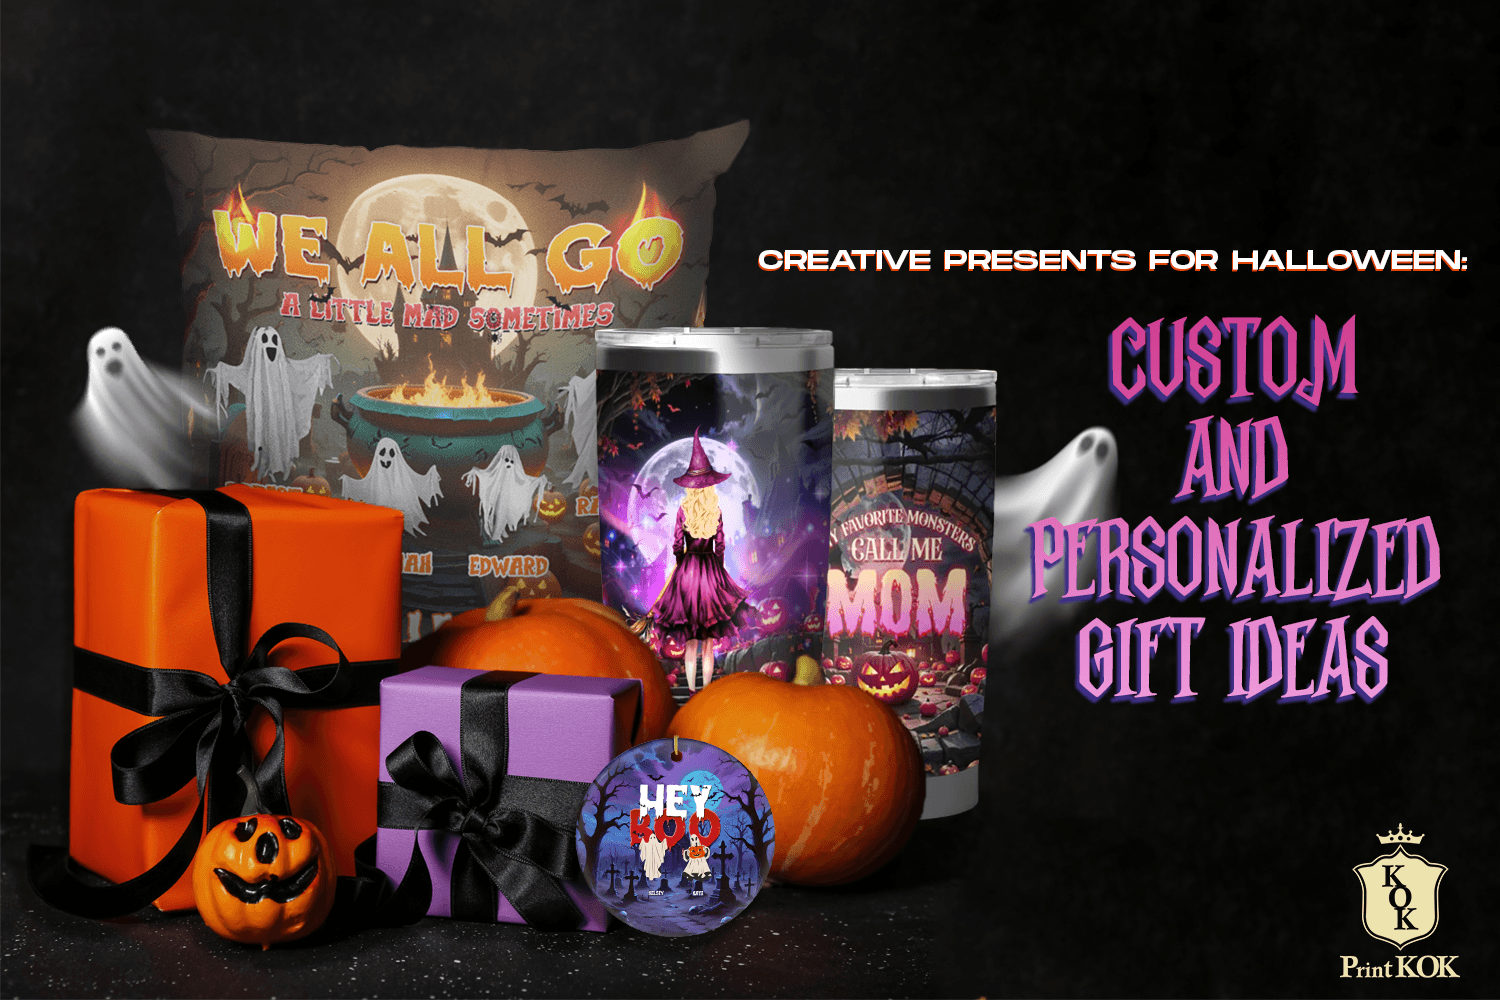 Creative Presents for Halloween: Custom and Personalized Gift Ideas